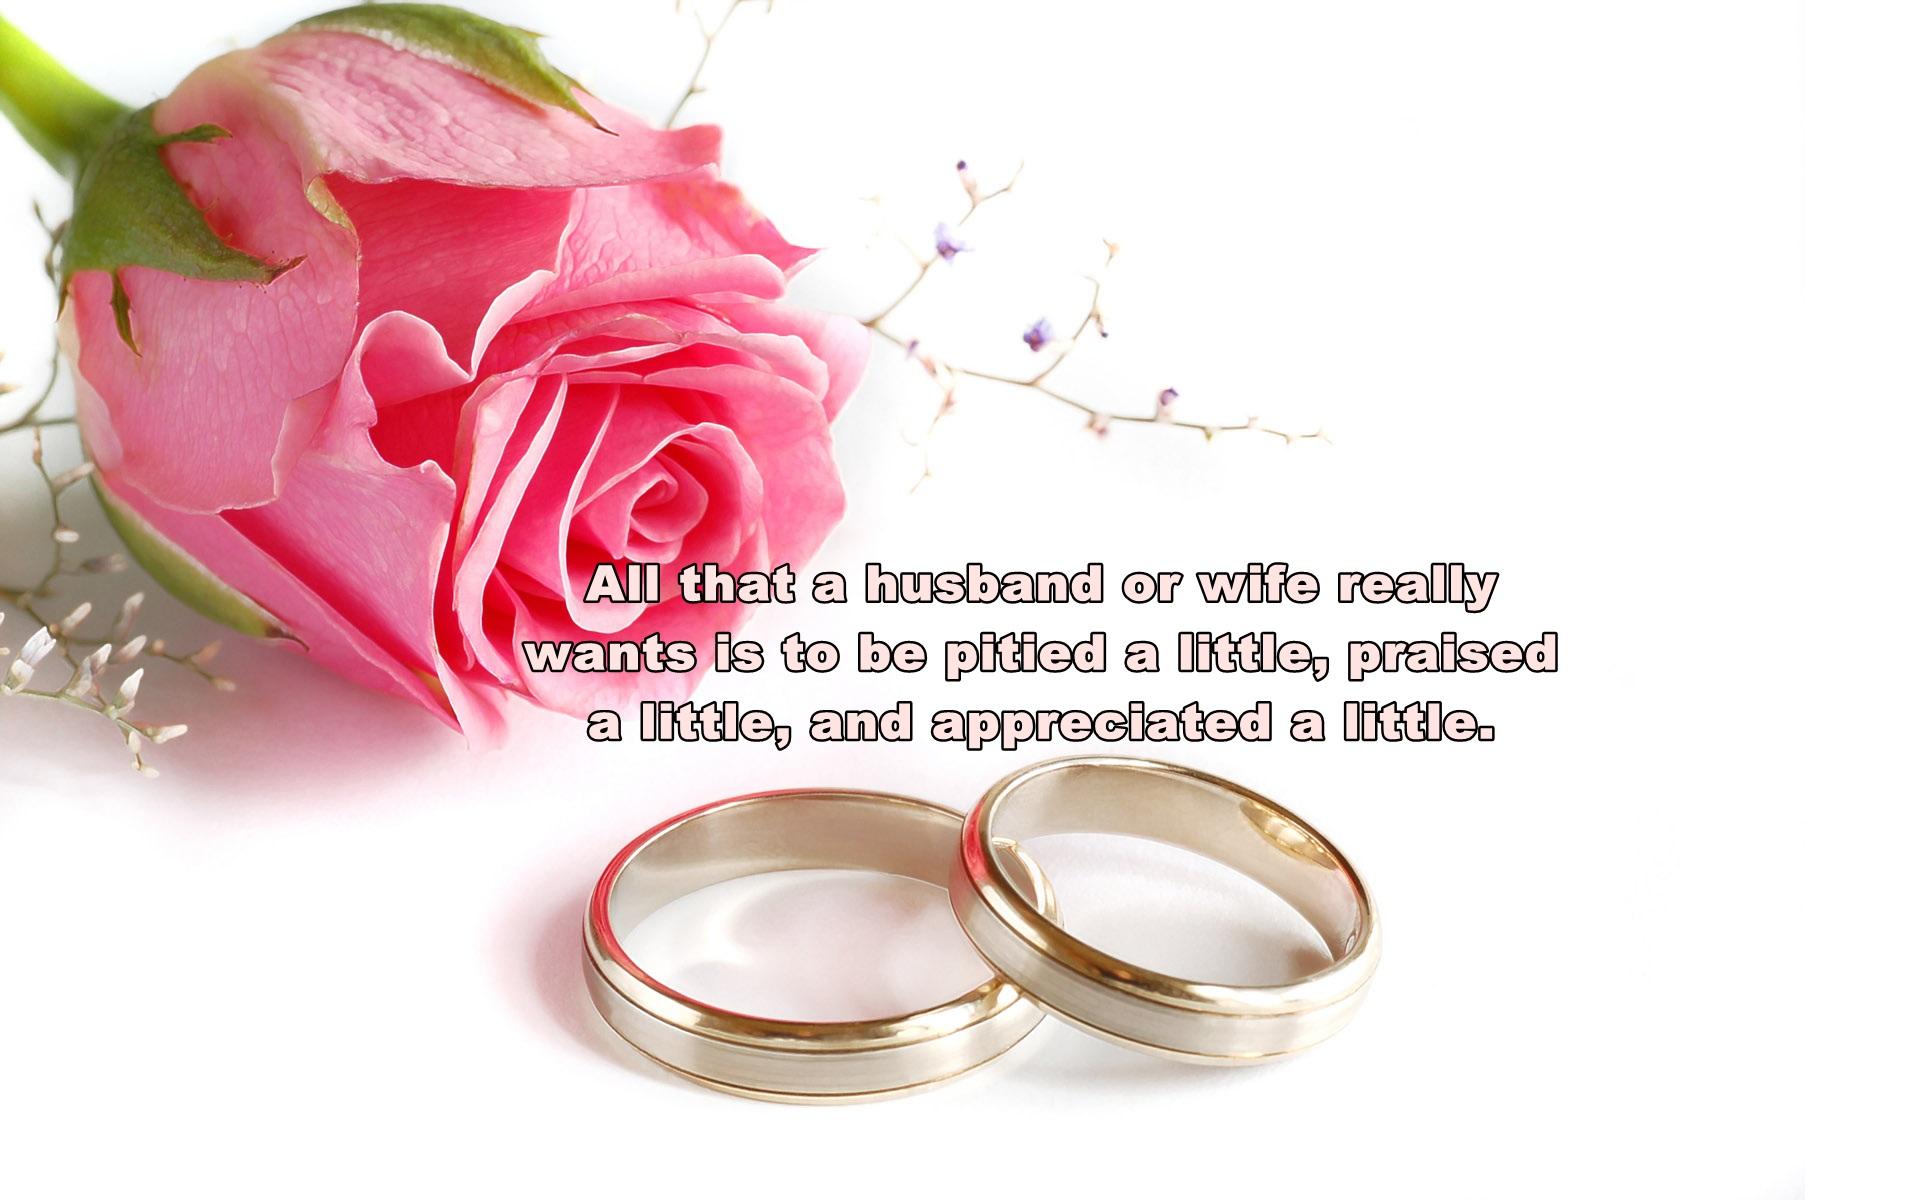 Special quote and wallpaper for your marriage